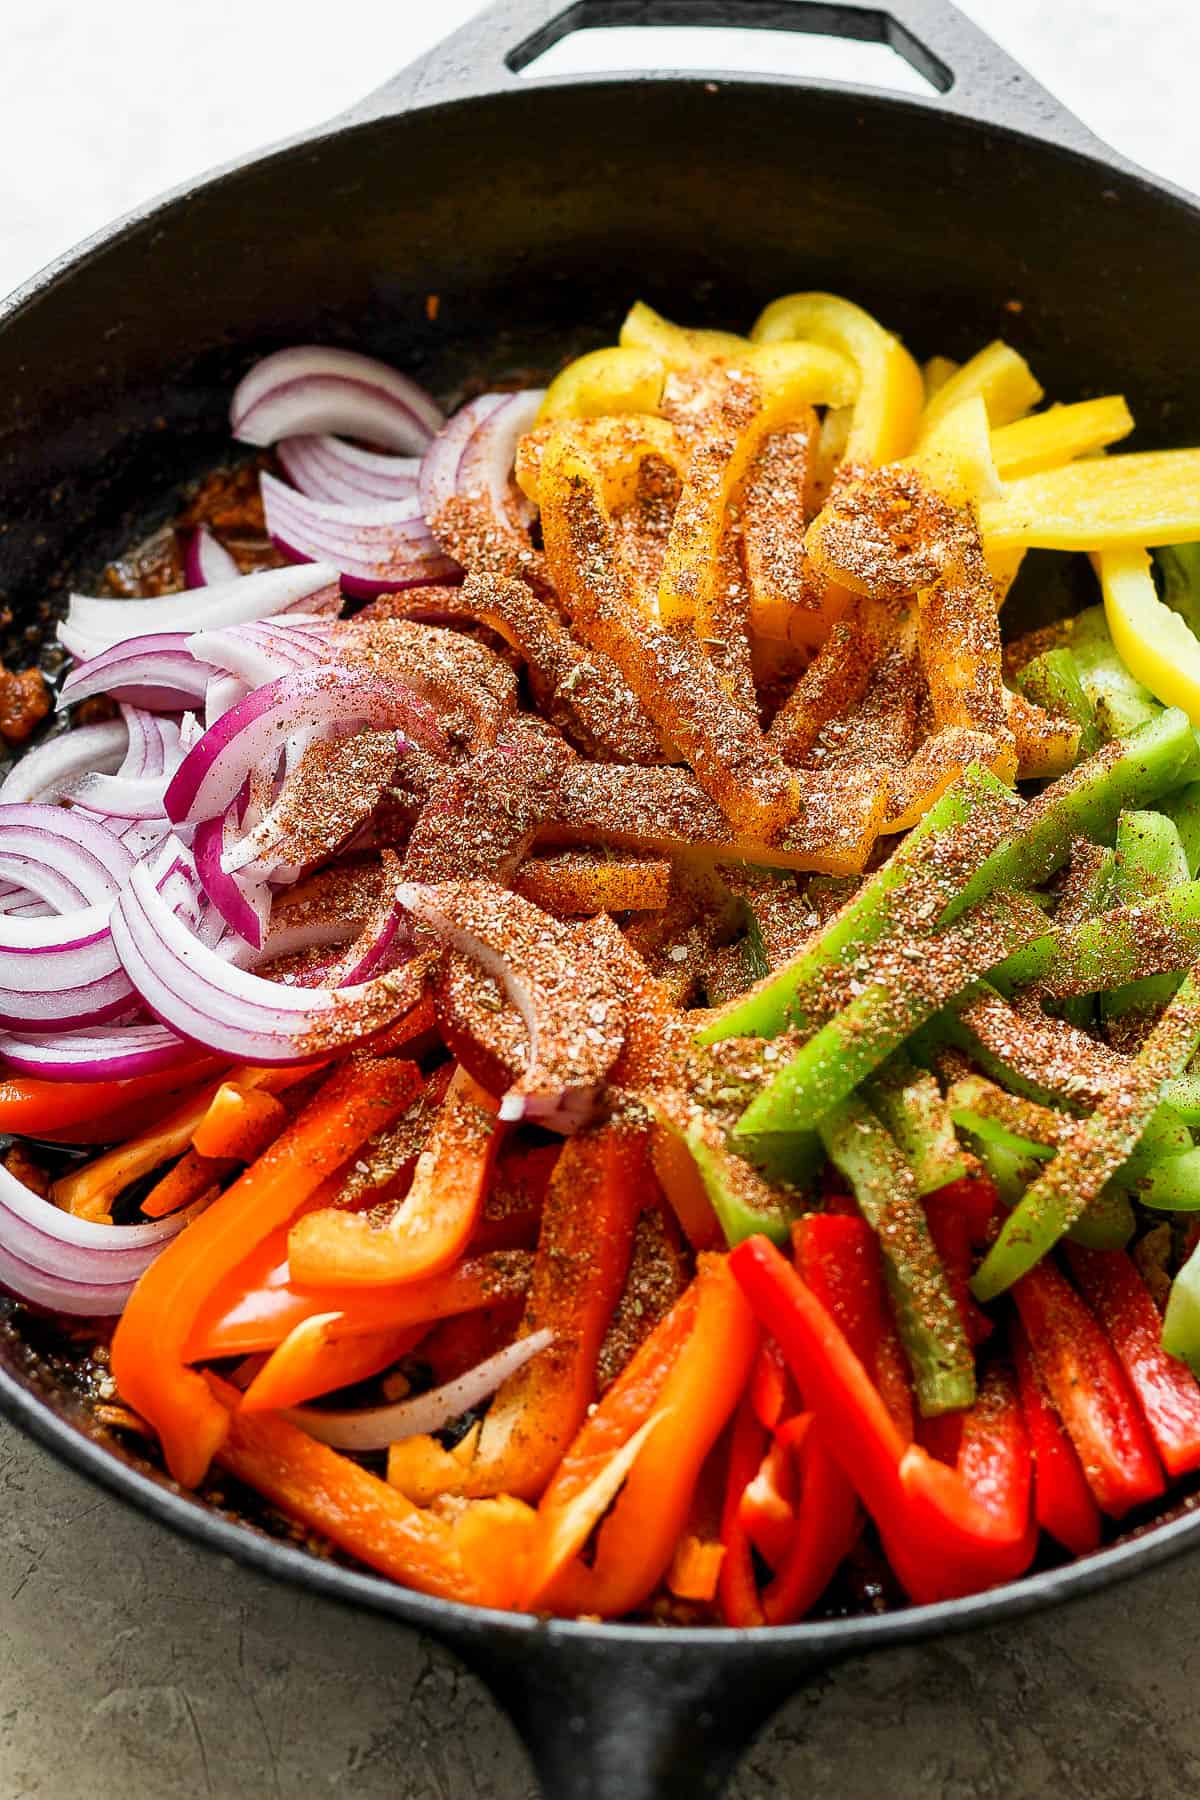 Onion and bell pepper slices in a cast iron skillet with the fajita seasoning.